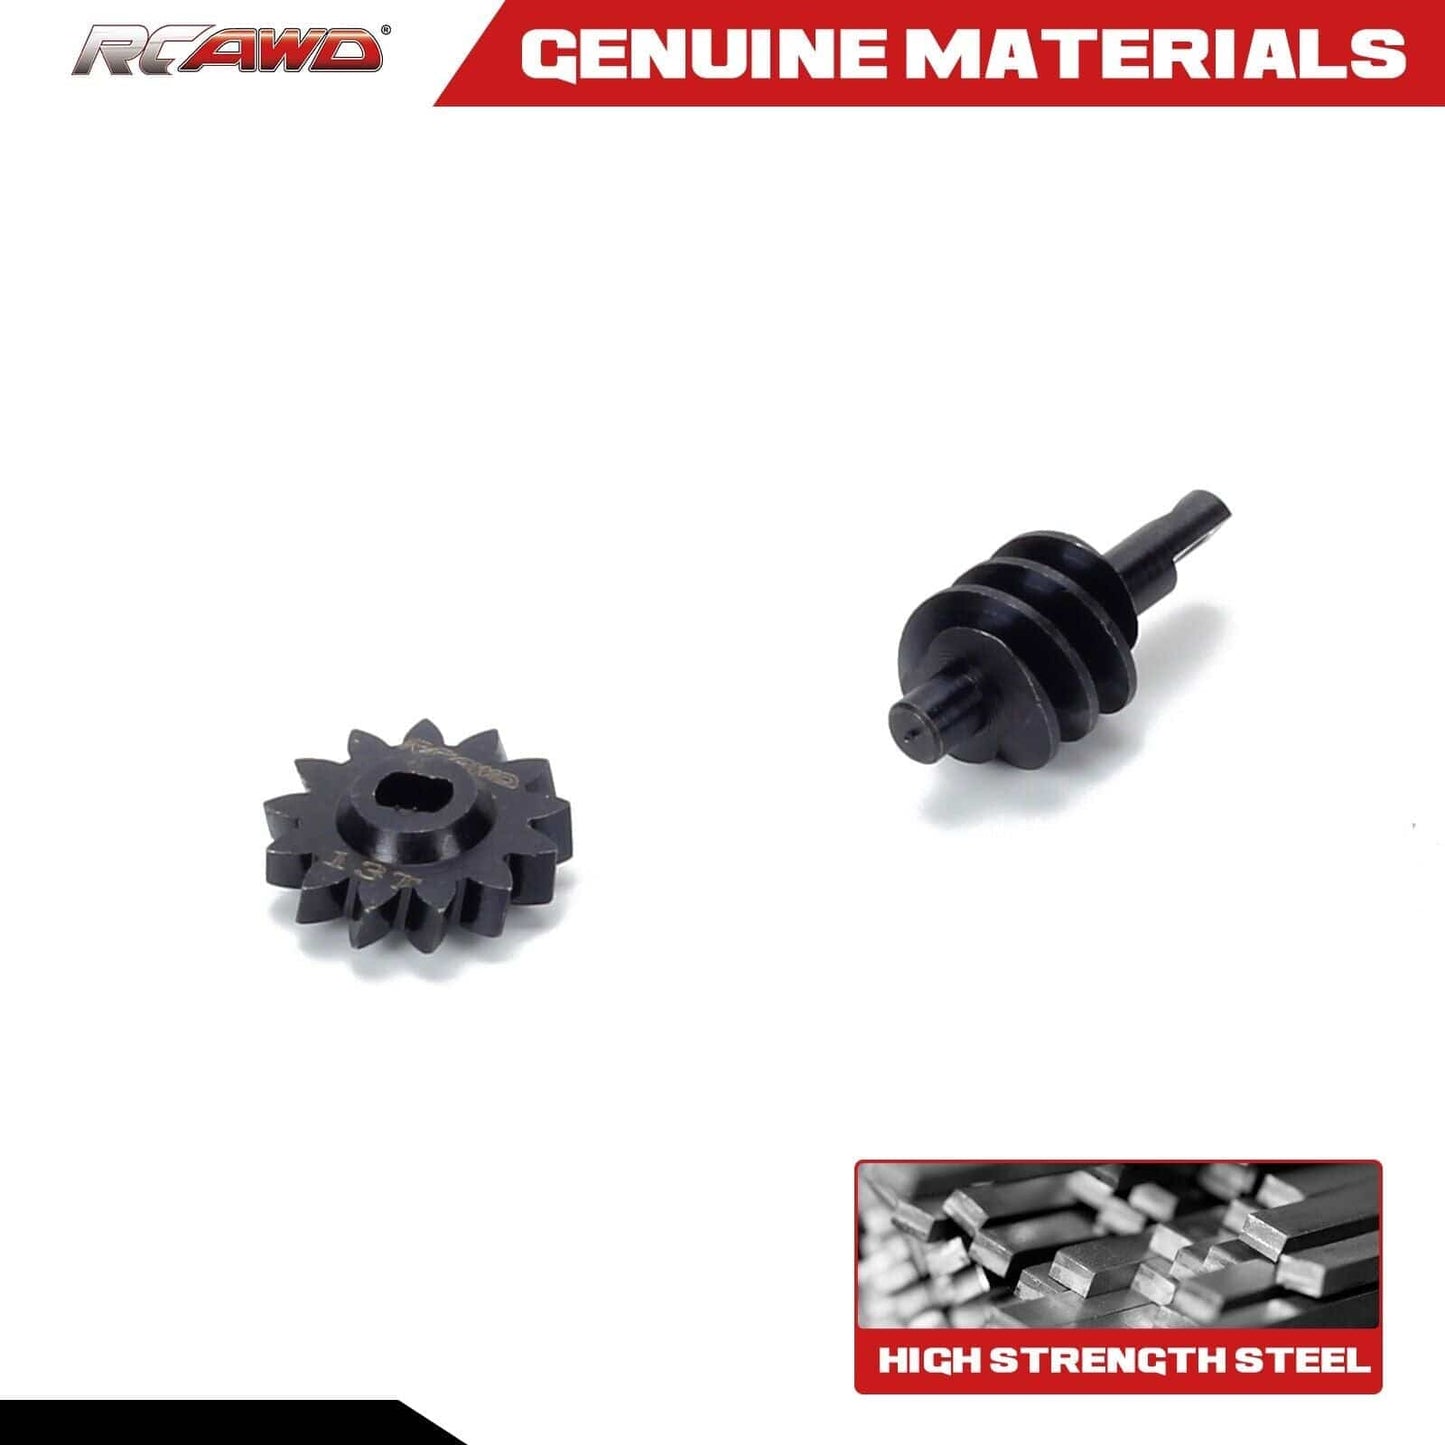 RCAWD Axial SCX24 13T Steel Front Rear Worm Gears Set -- RCAWD